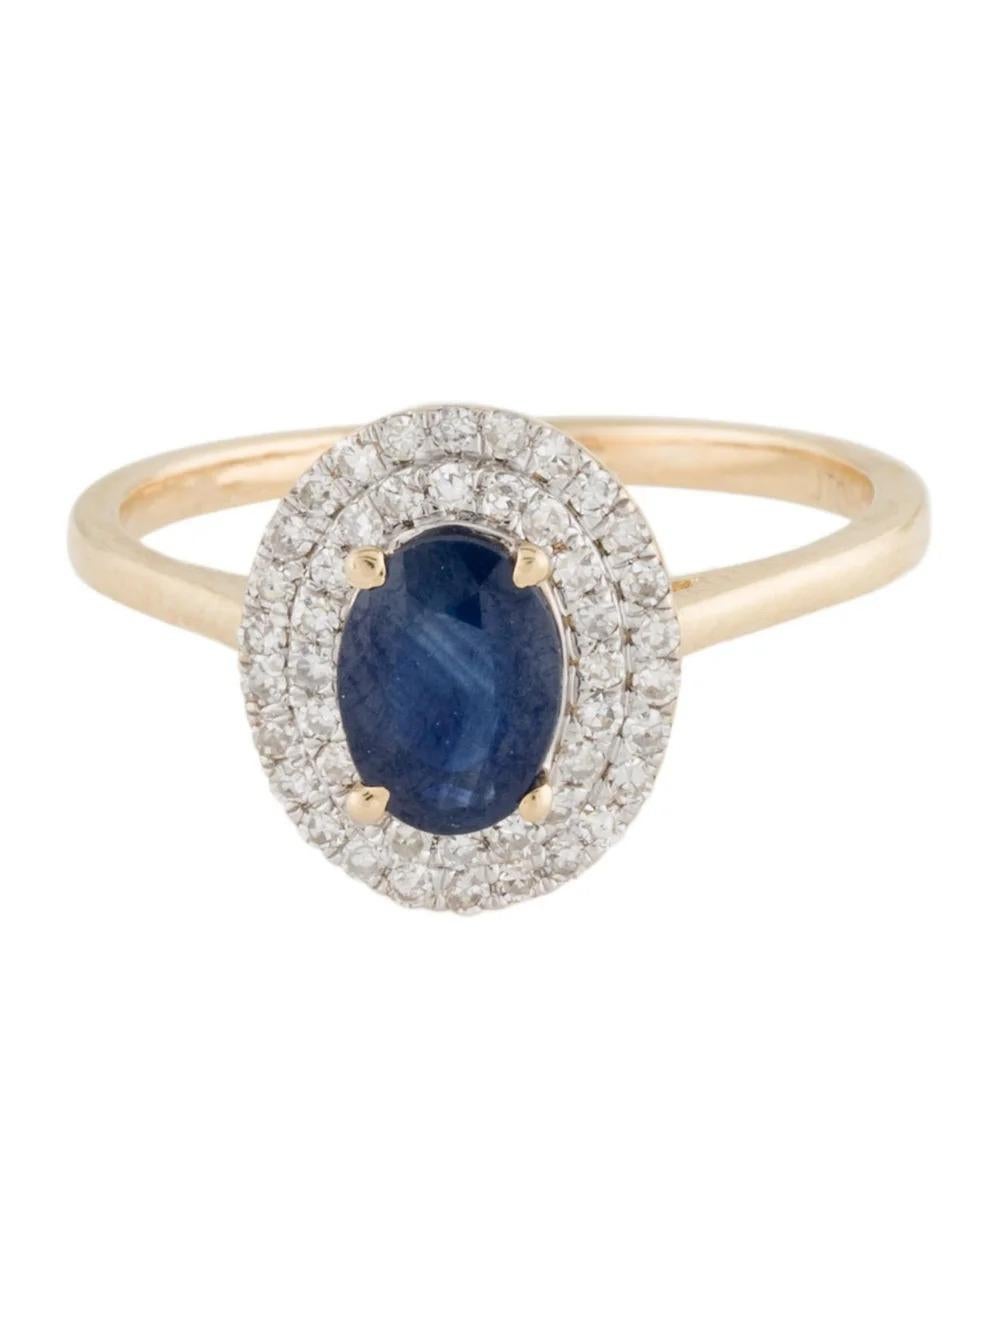 Oval Cut 14K Sapphire & Diamond Cocktail Ring, Size 6.25 - Elegant Statement Jewelry For Sale